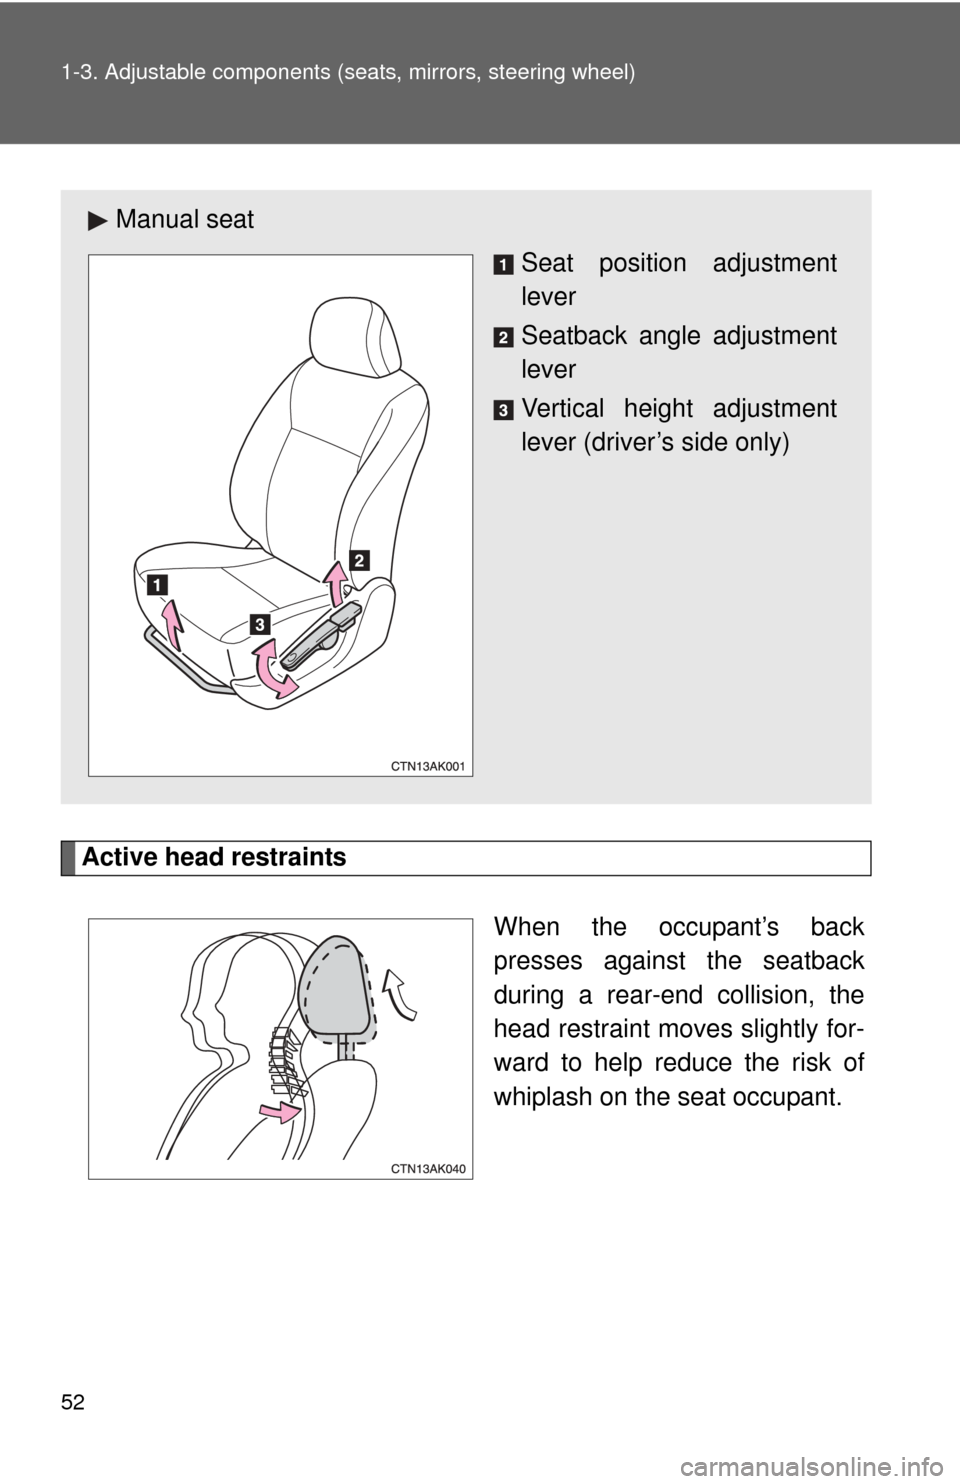 TOYOTA COROLLA 2013 11.G Owners Manual 52 1-3. Adjustable components (seats, mirrors, steering wheel)
Active head restraints
When the occupant’s back
presses against the seatback
during a rear-end collision, the
head restraint moves slig